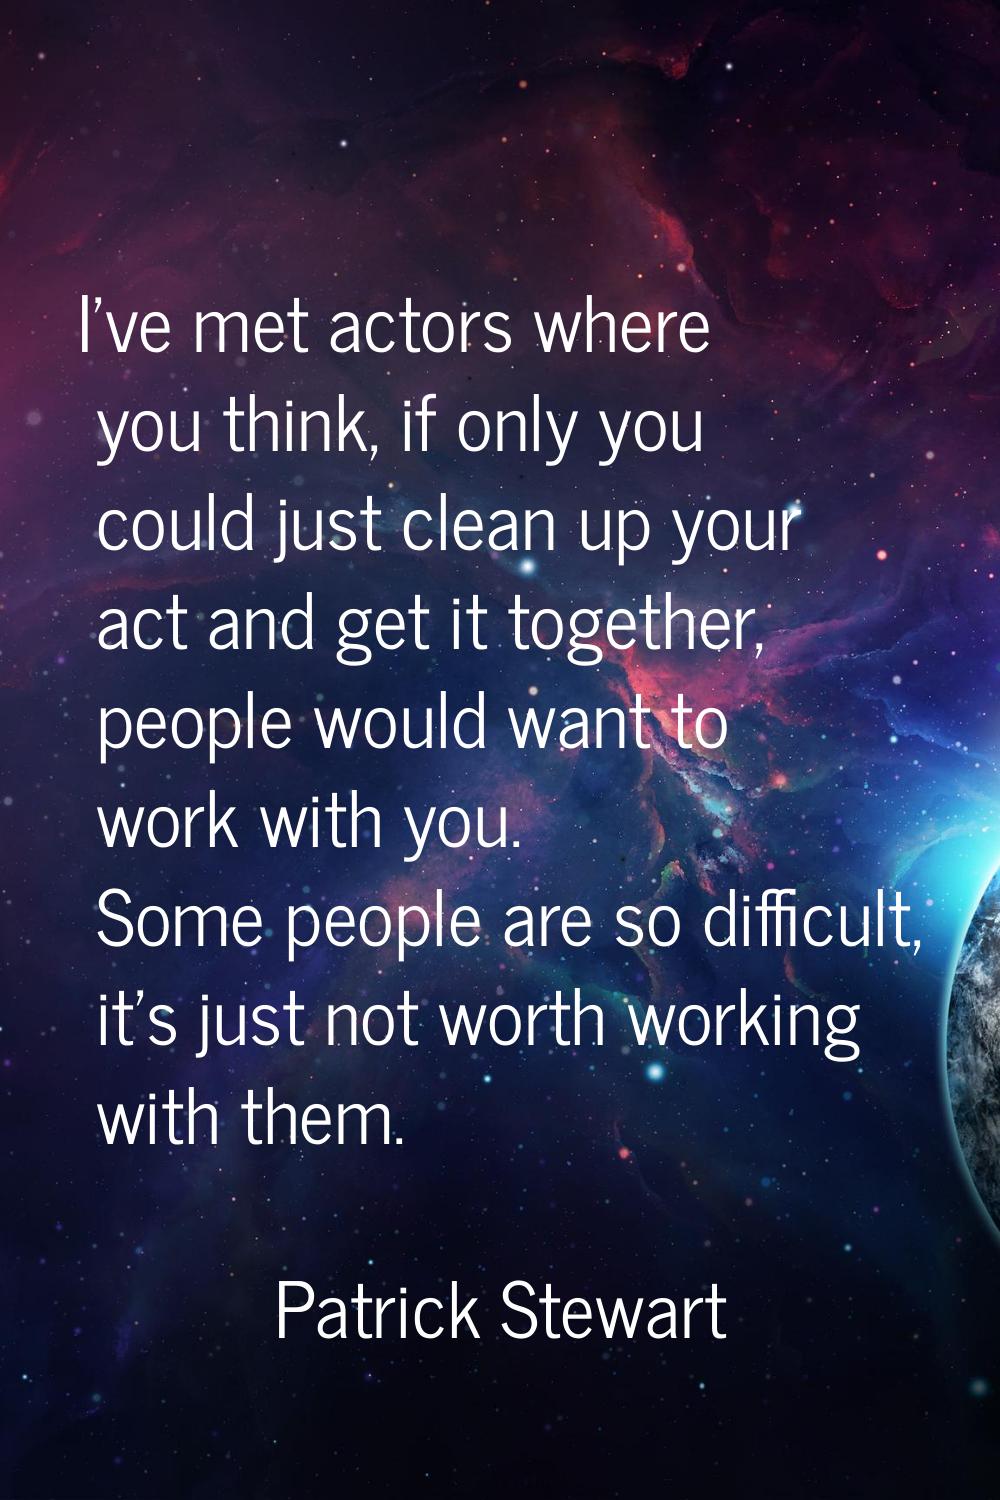 I've met actors where you think, if only you could just clean up your act and get it together, peop